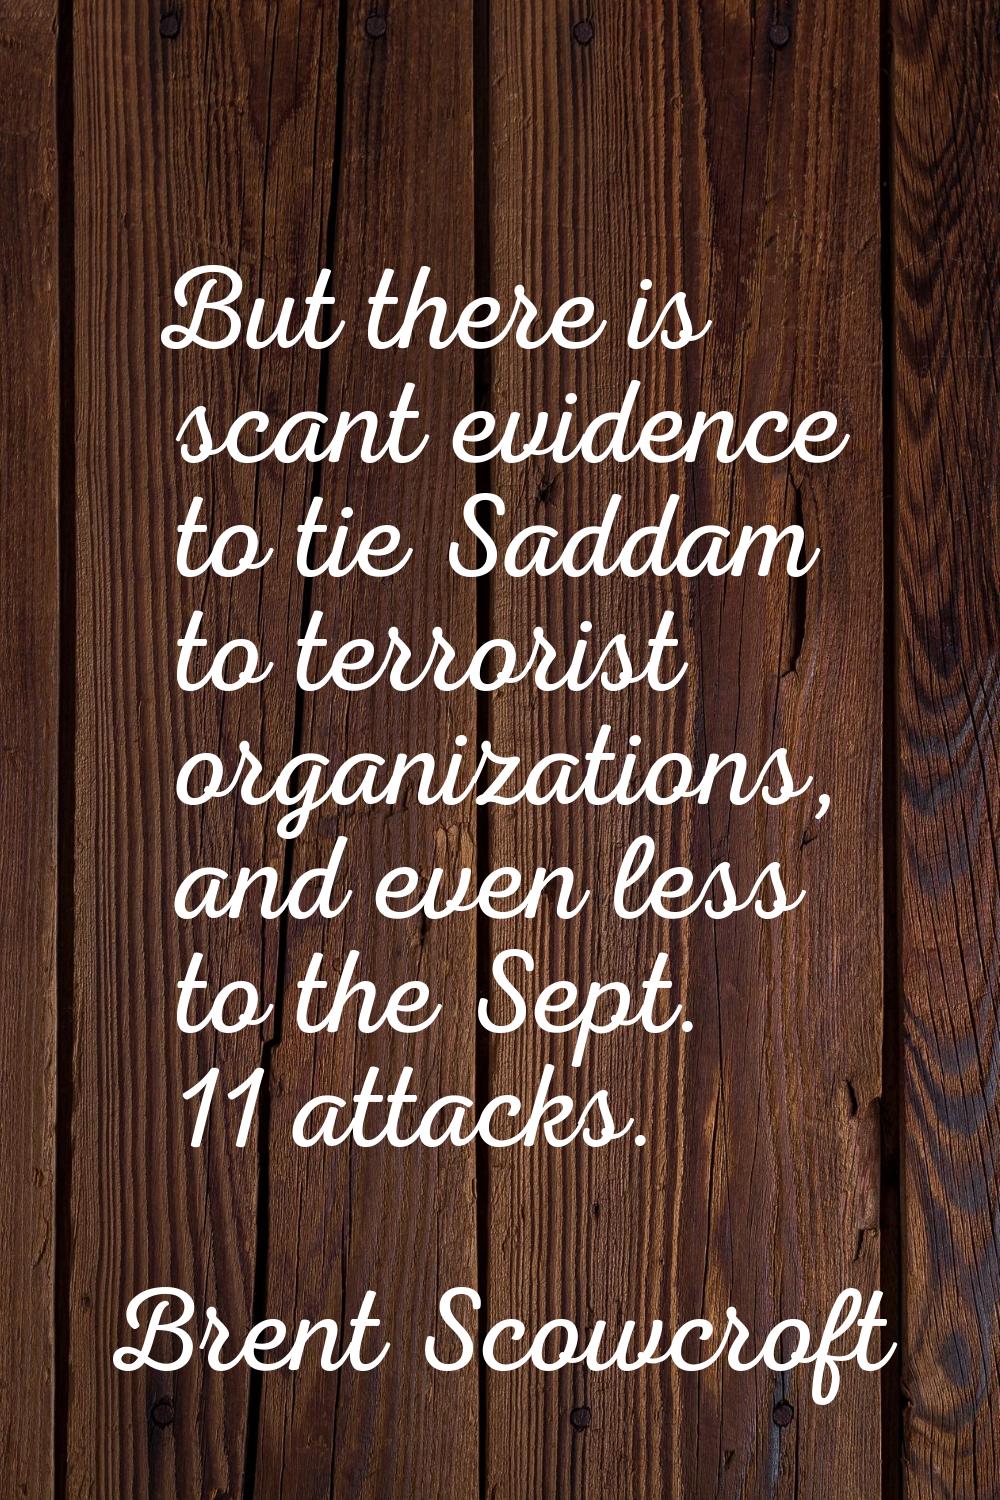 But there is scant evidence to tie Saddam to terrorist organizations, and even less to the Sept. 11